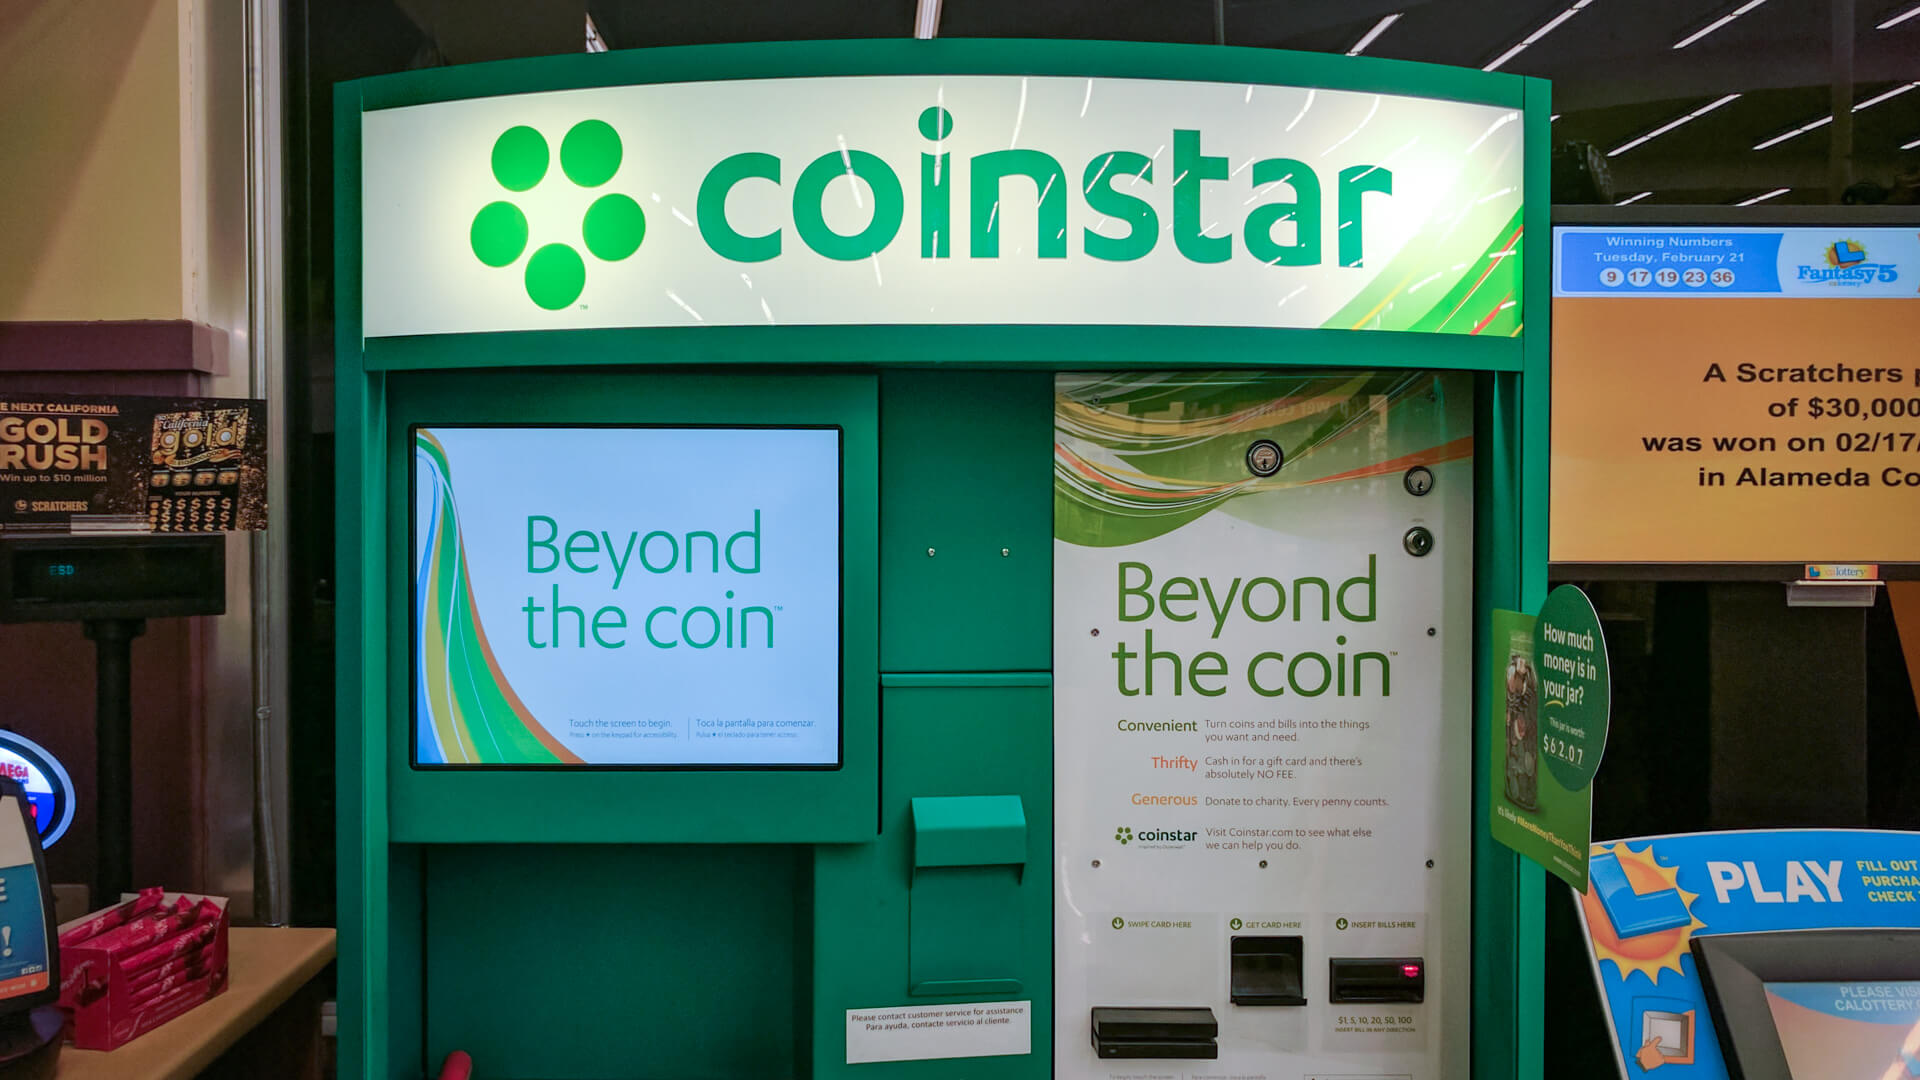 Coinstar Near Me: Find Coinstar Locations and Other Coin Machines